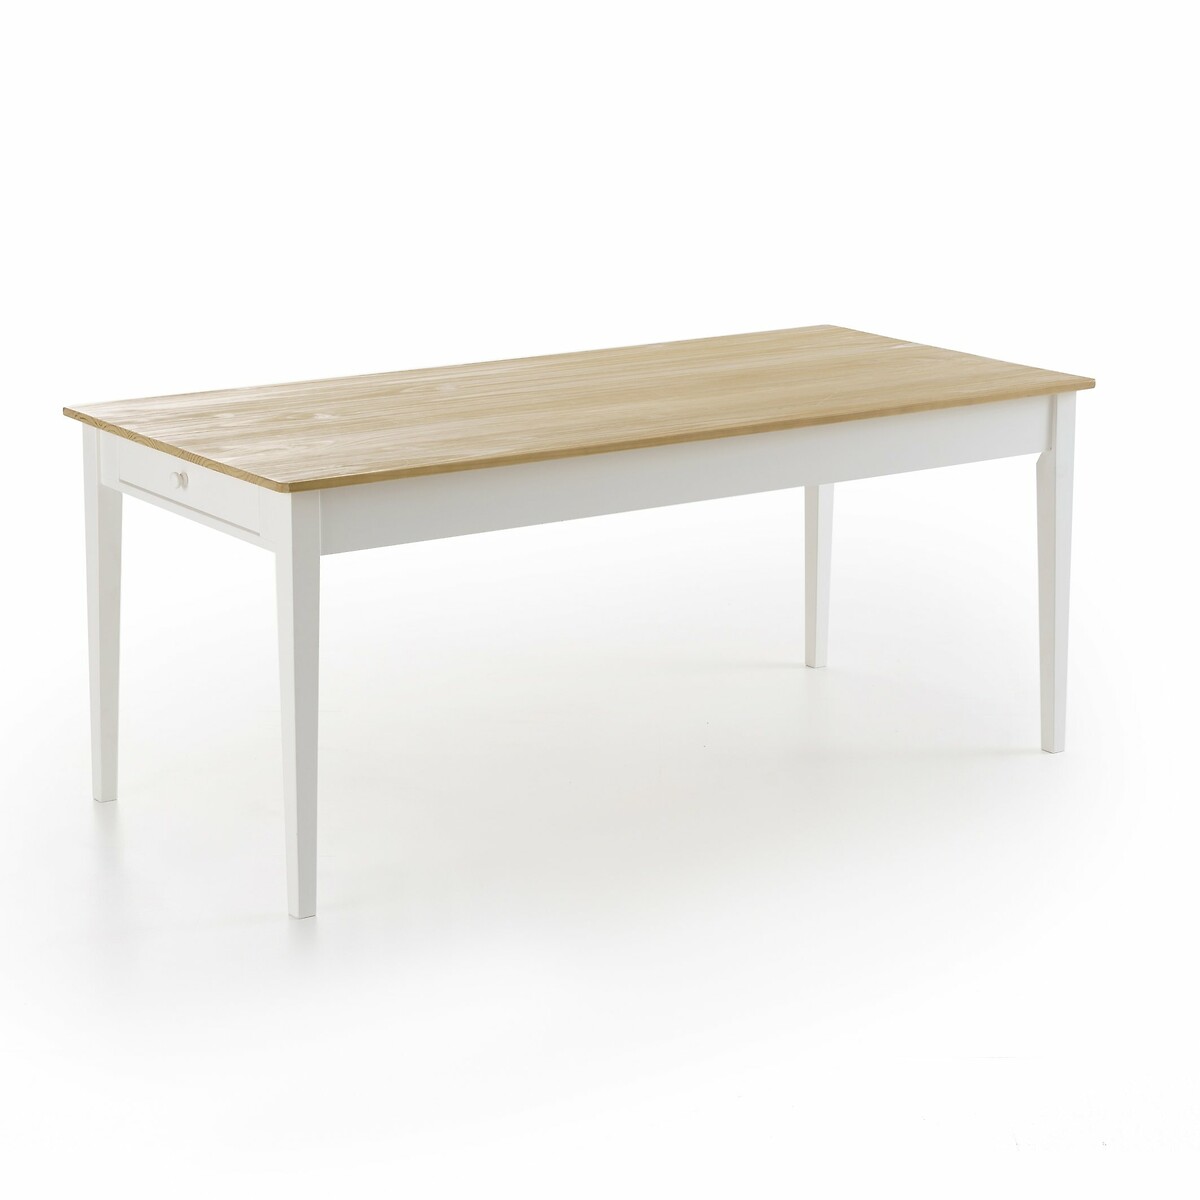 Alvina Solid Pine Dining Table (Seats 6-8)